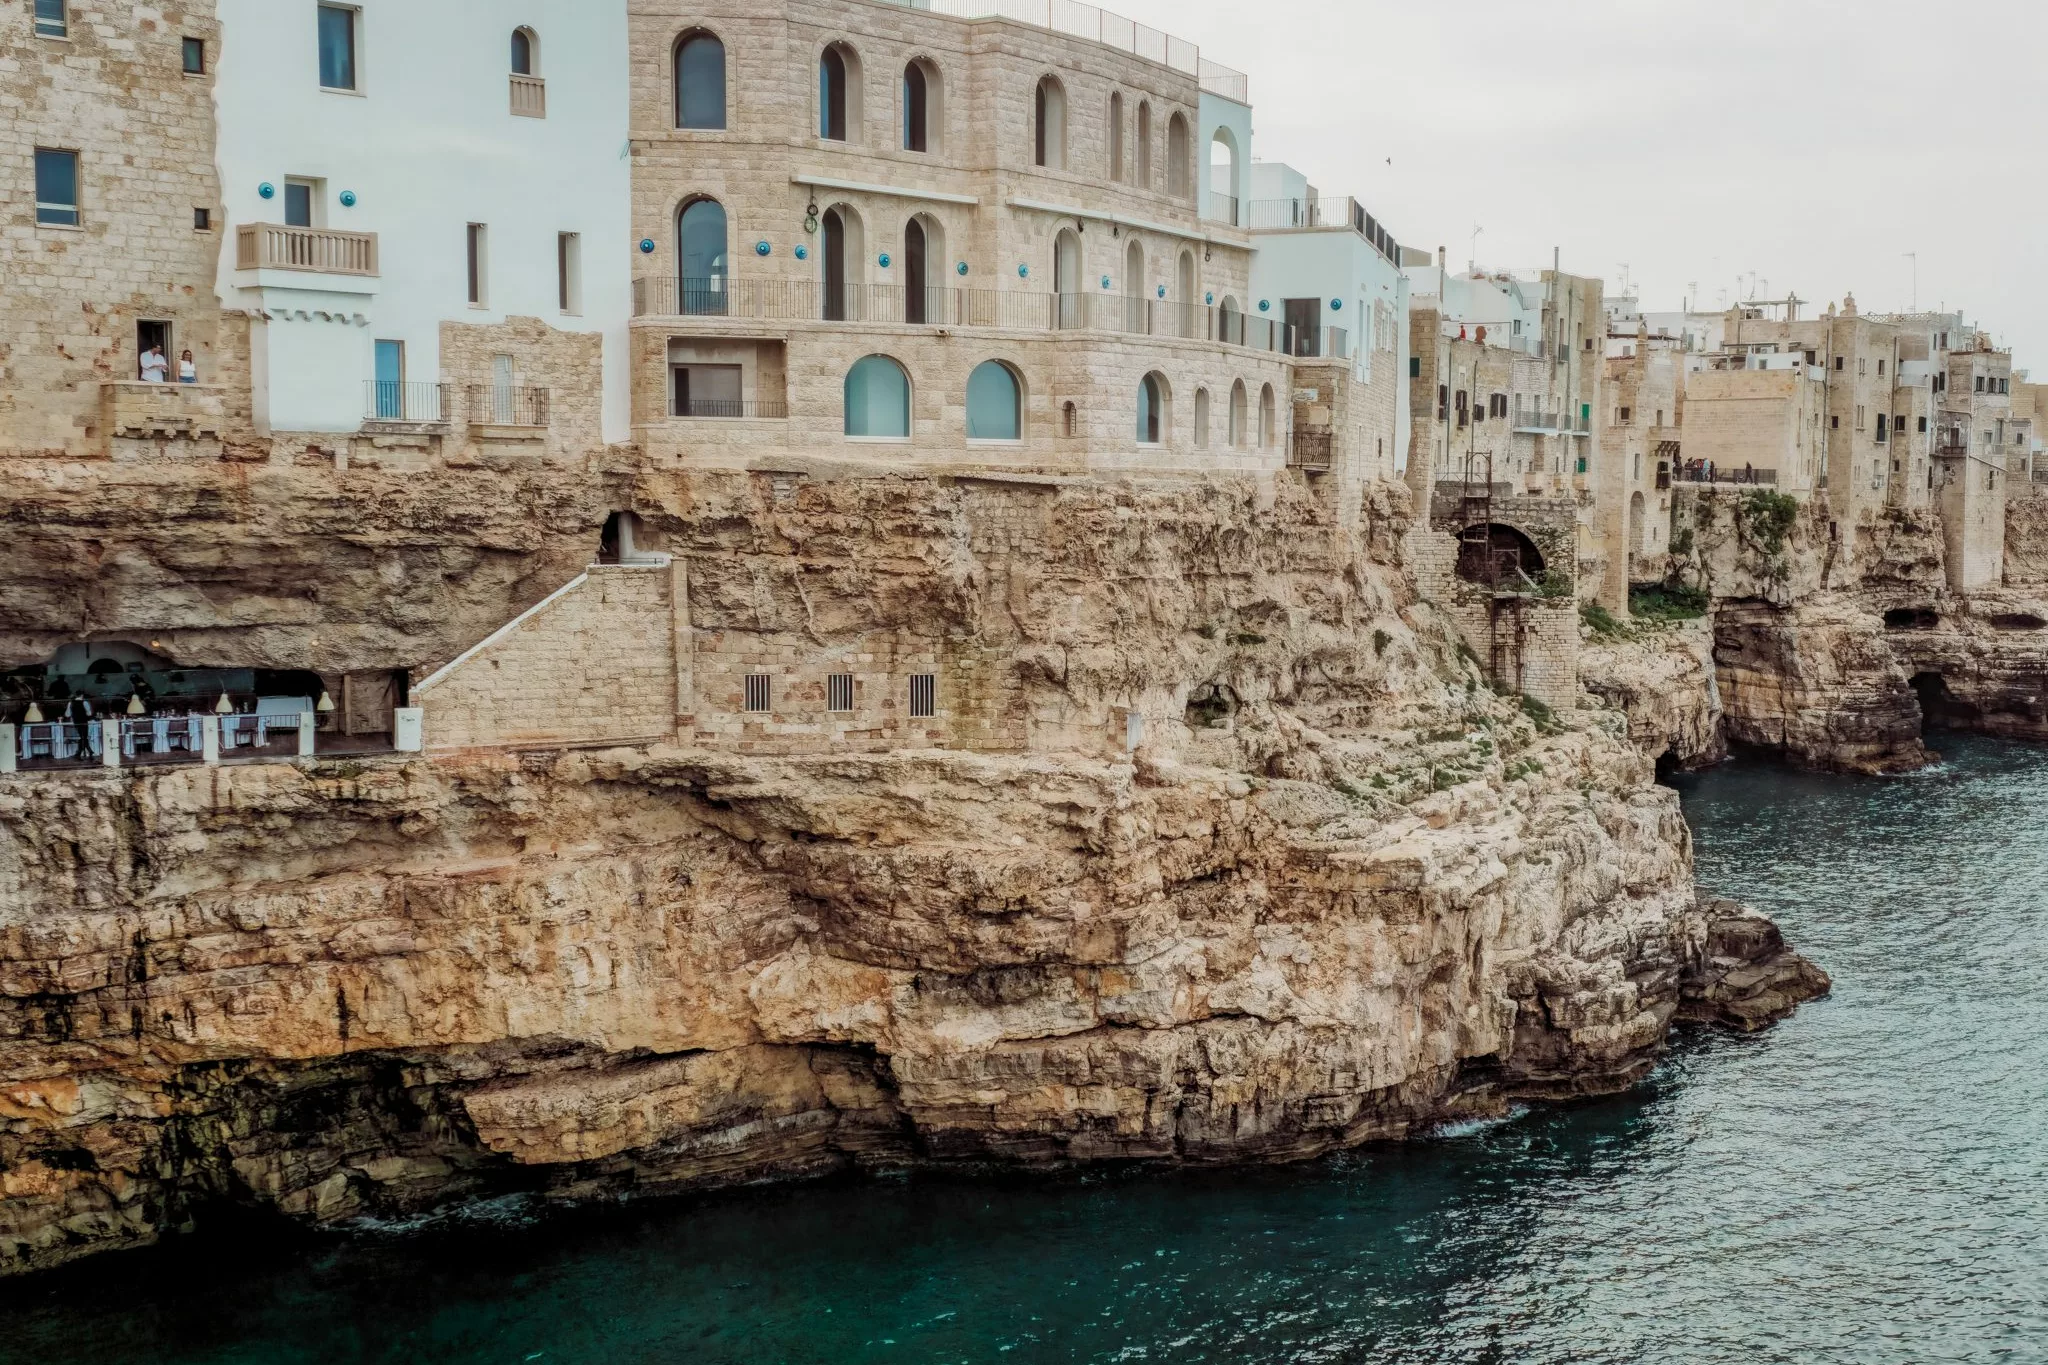 viewpoints in Polignano a Mare, Grotta Palazzese